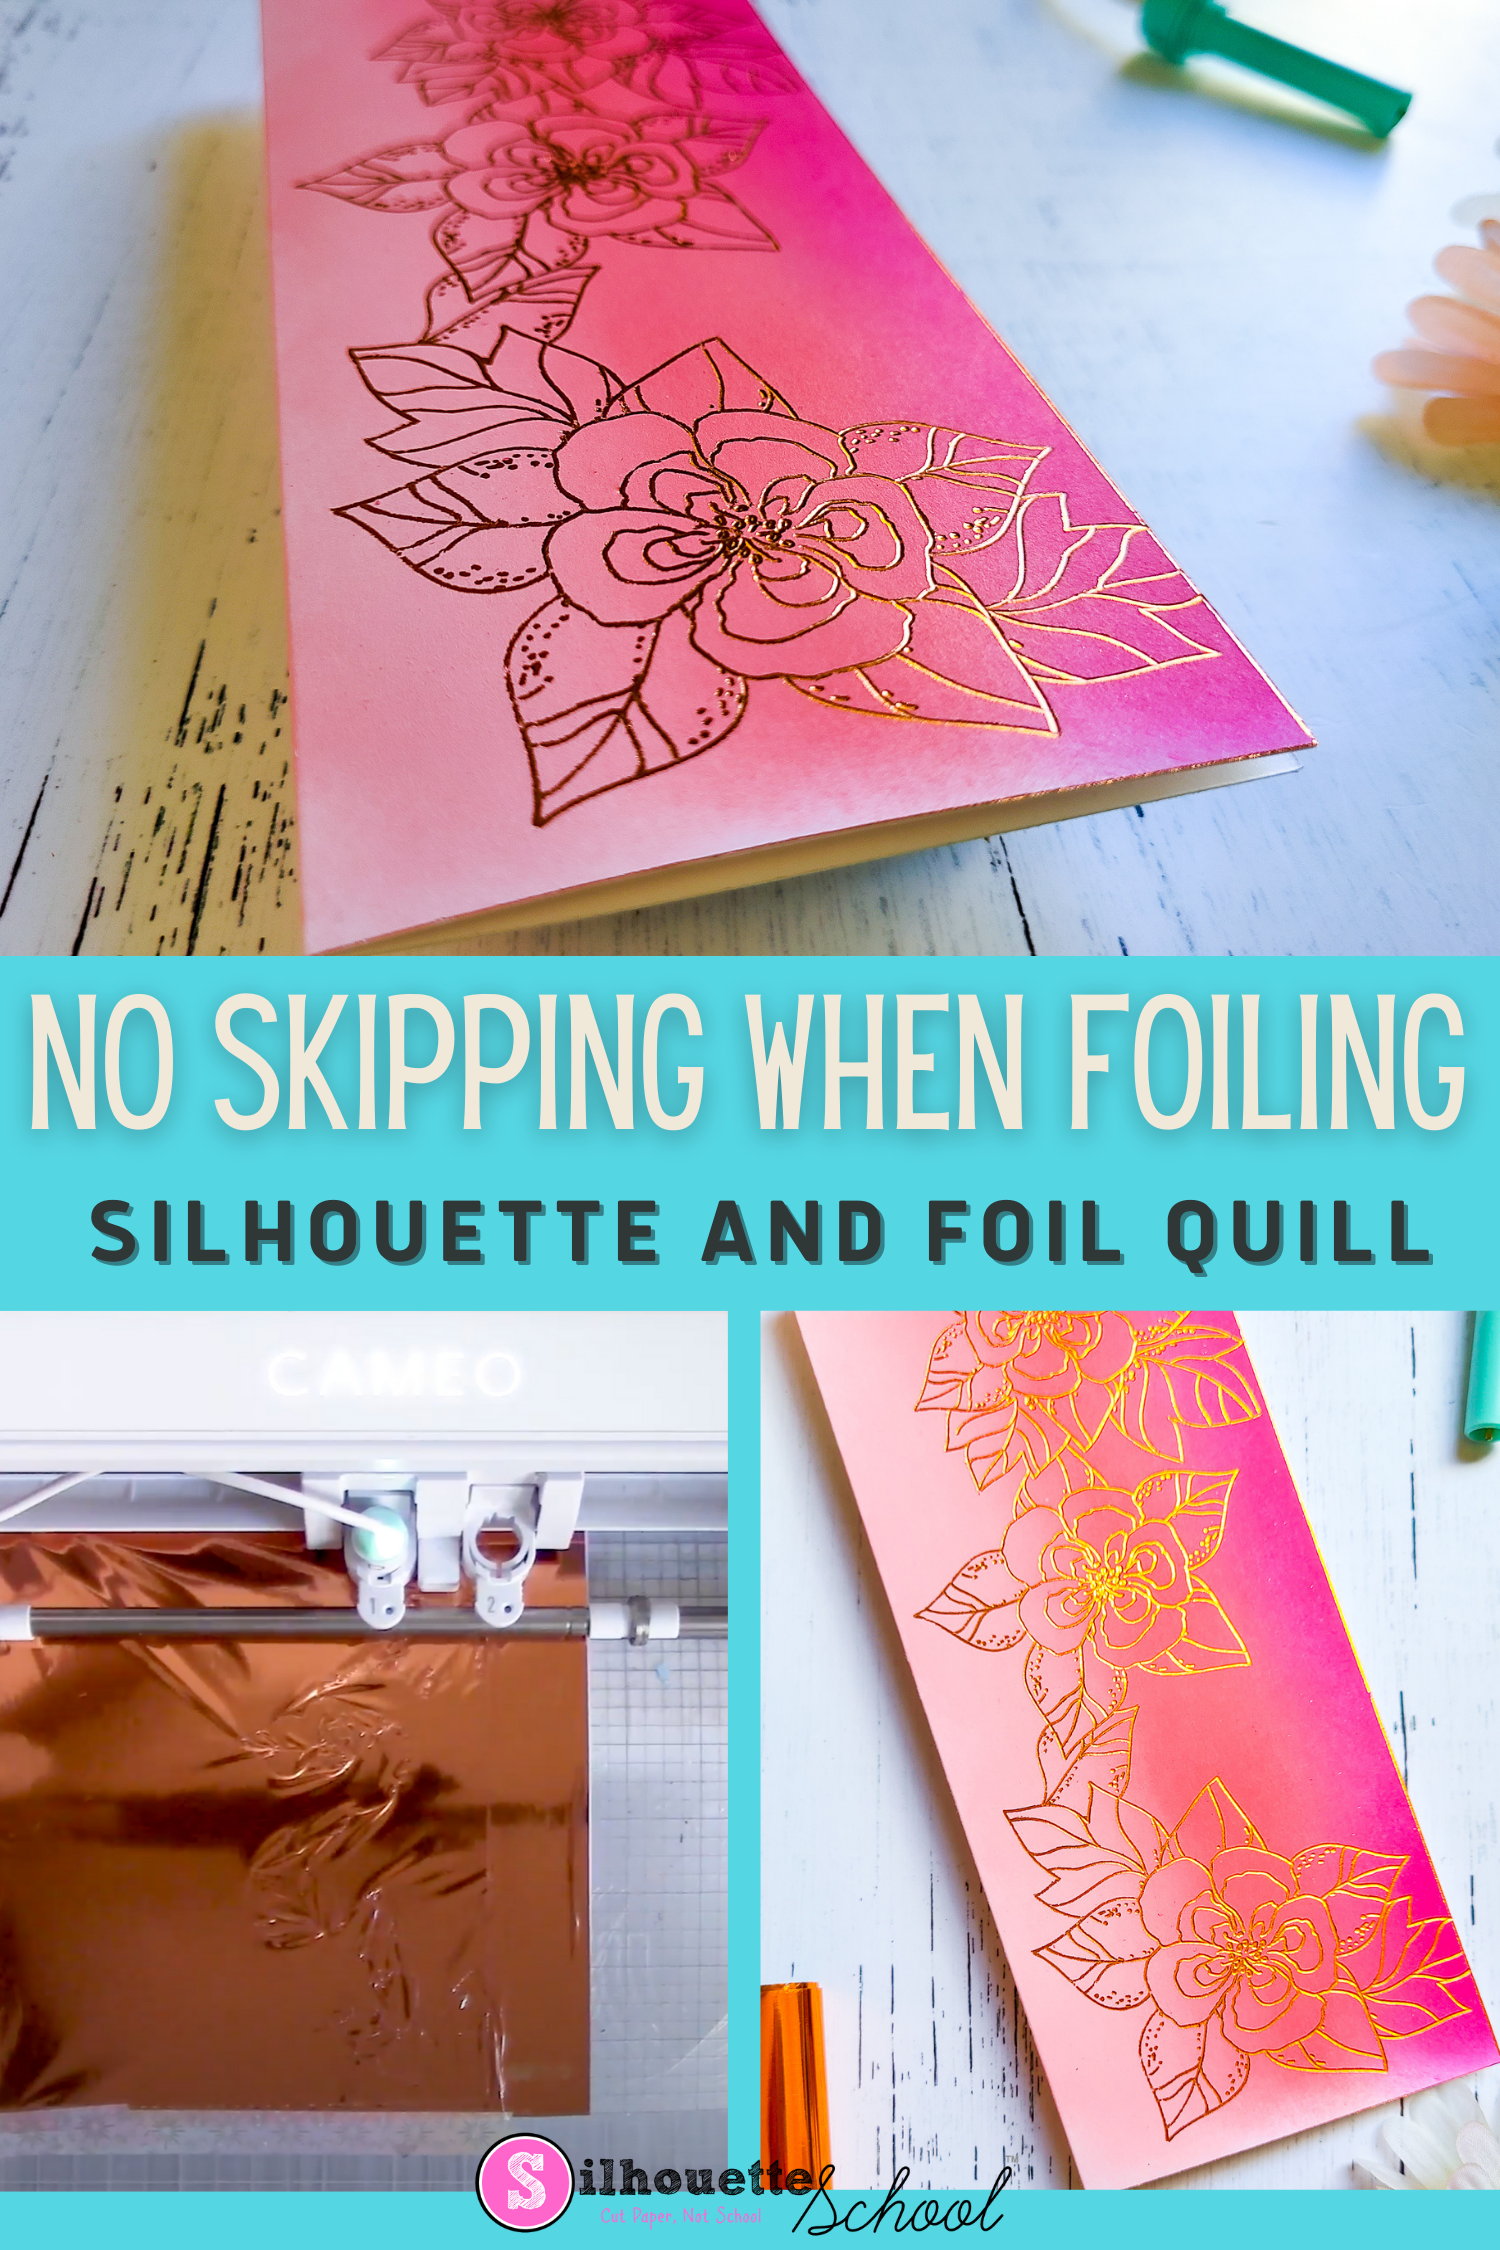 How To Use The Foil Quill - Create With Sue